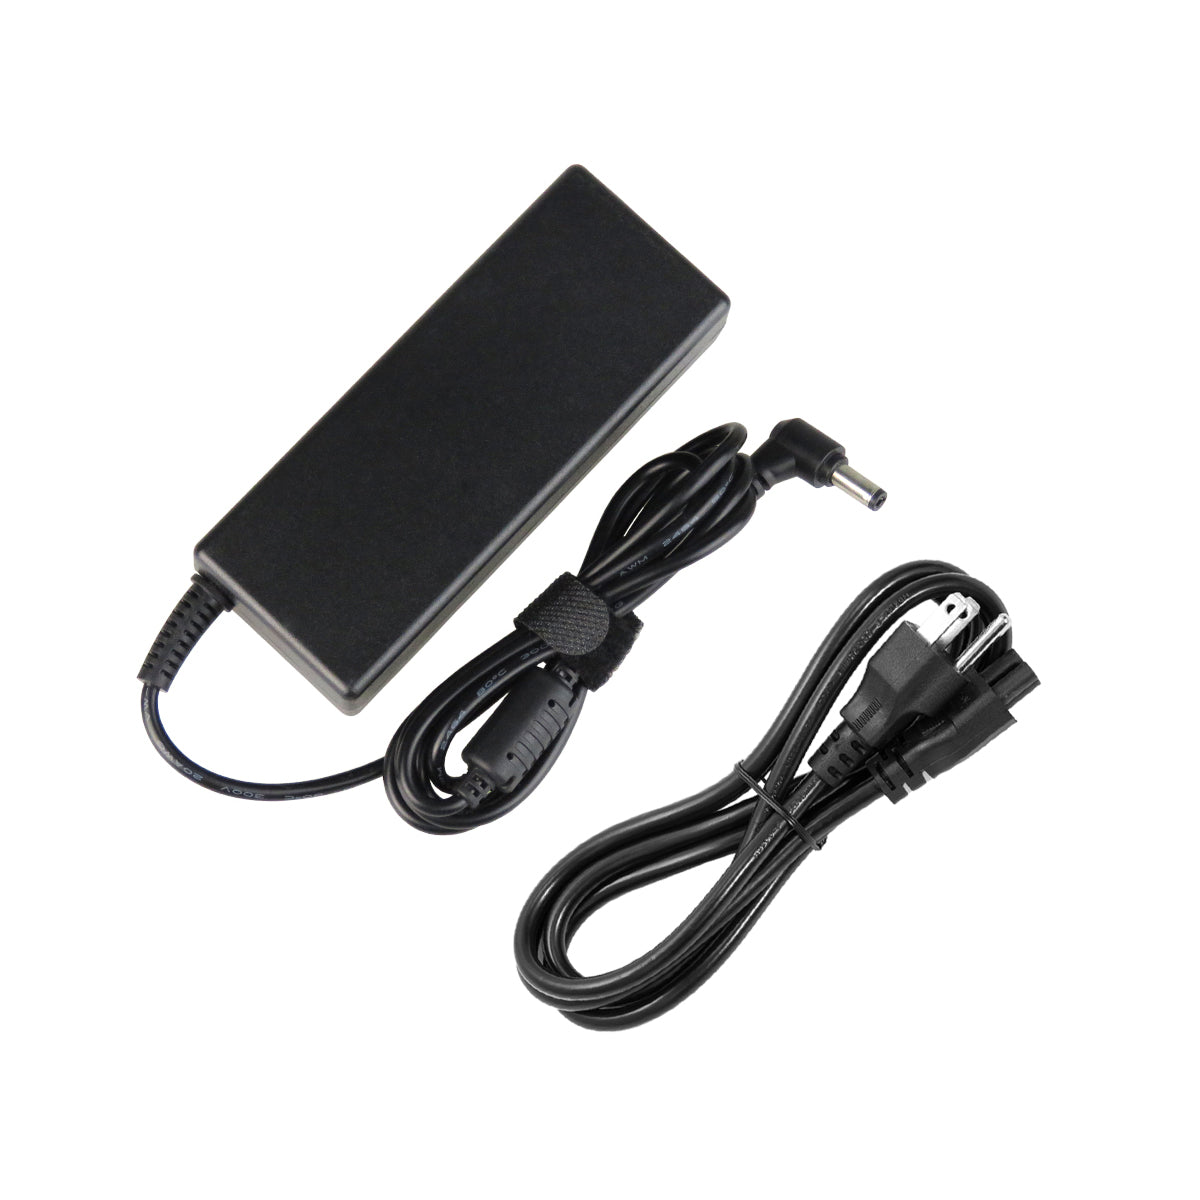 AC Adapter Charger for ASUS A54C-AB91 Laptop.